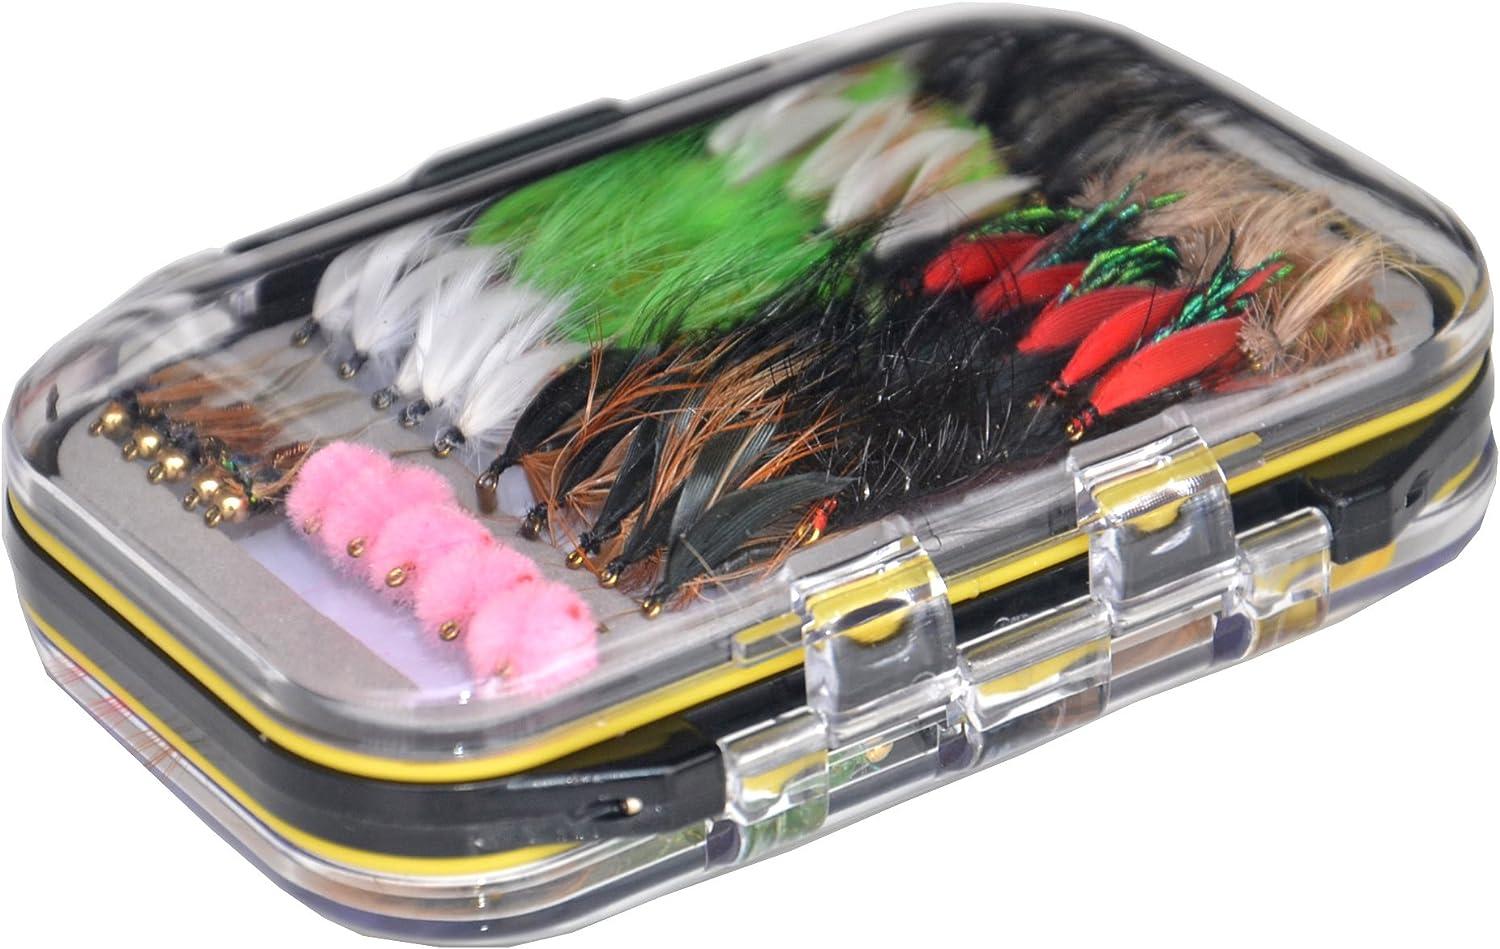 Outdoor Planet Waterproof Fly Box with Dry/Wet/Nymph/Streamer Trout Fly  Fishing Flies Lure 100Pieces flies + Pocket Fly box